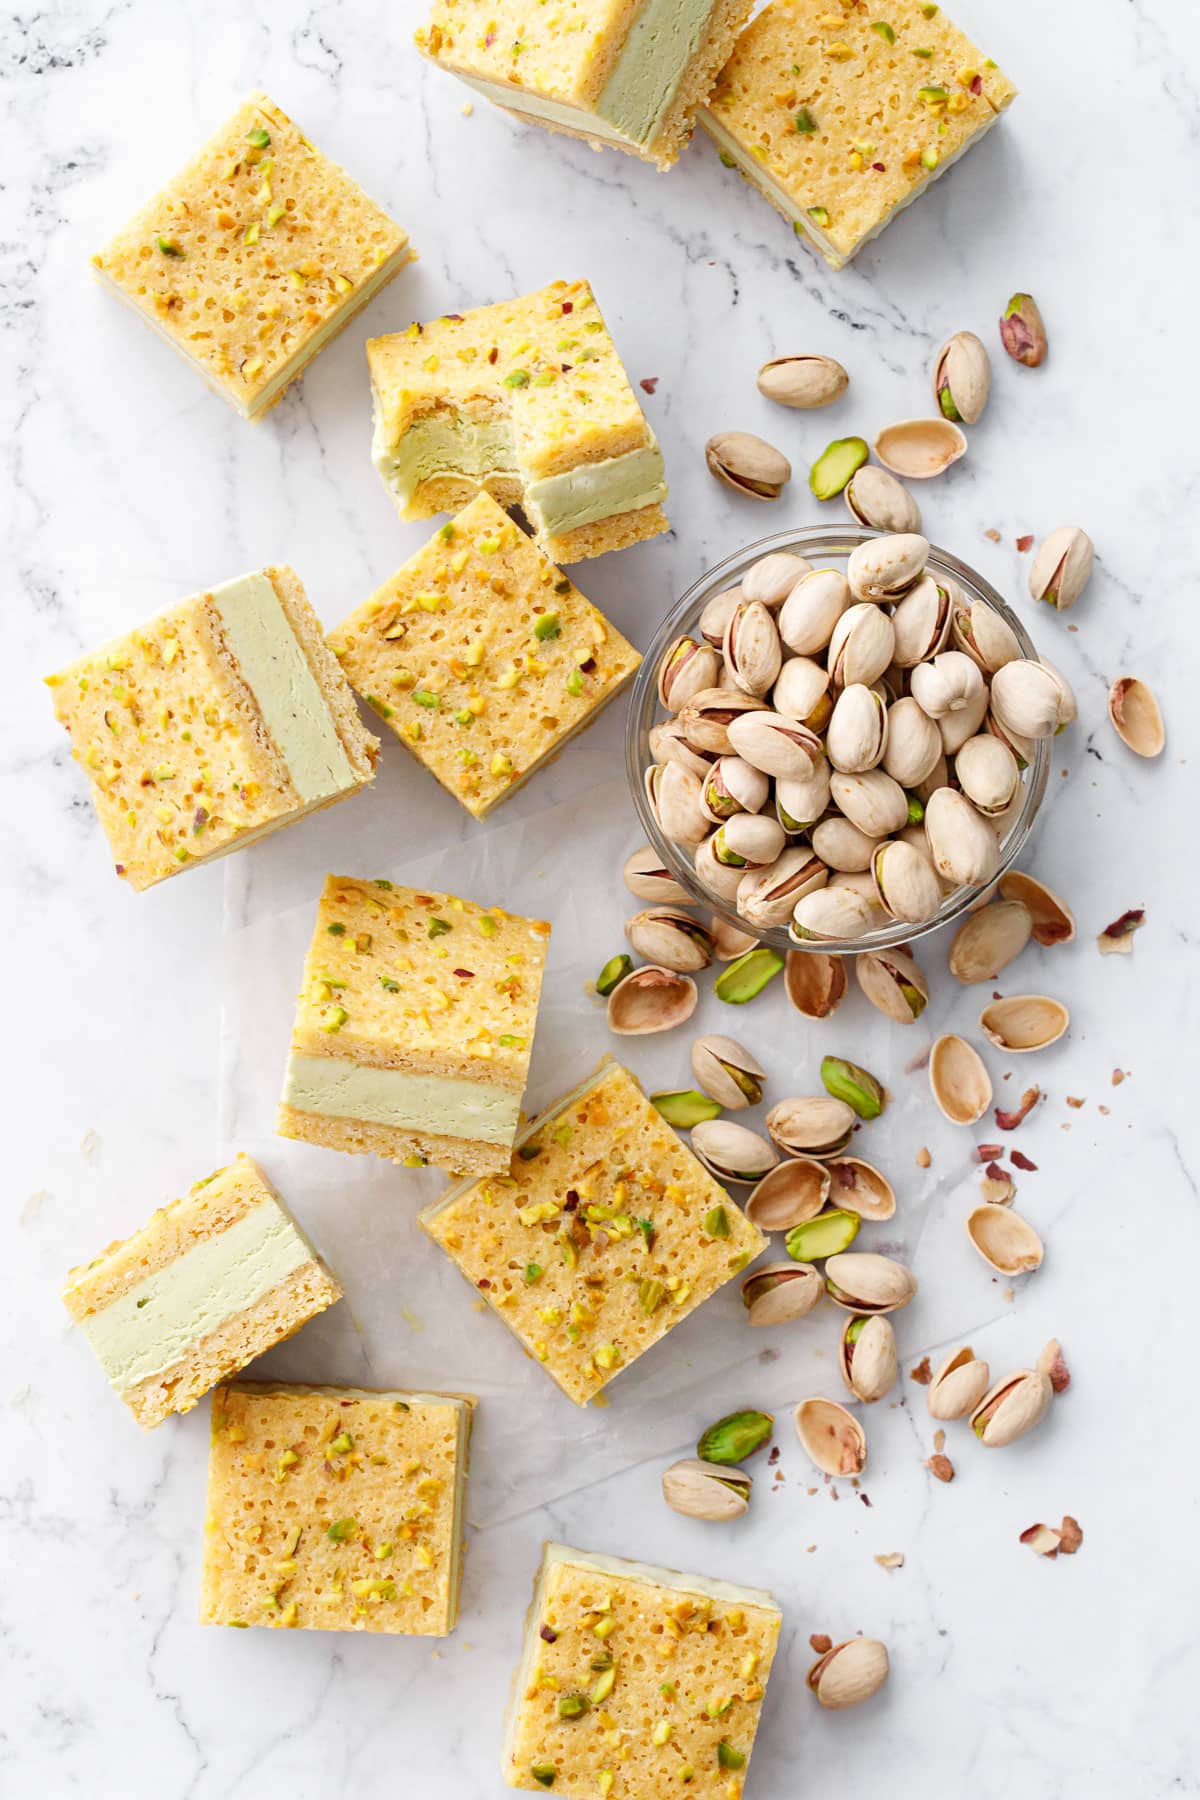 Overhead, messy arrangement of Pistachio Blondie Ice Cream Sandwiches cut into squares, with bowl of pistachios and more pistachios scattered around.